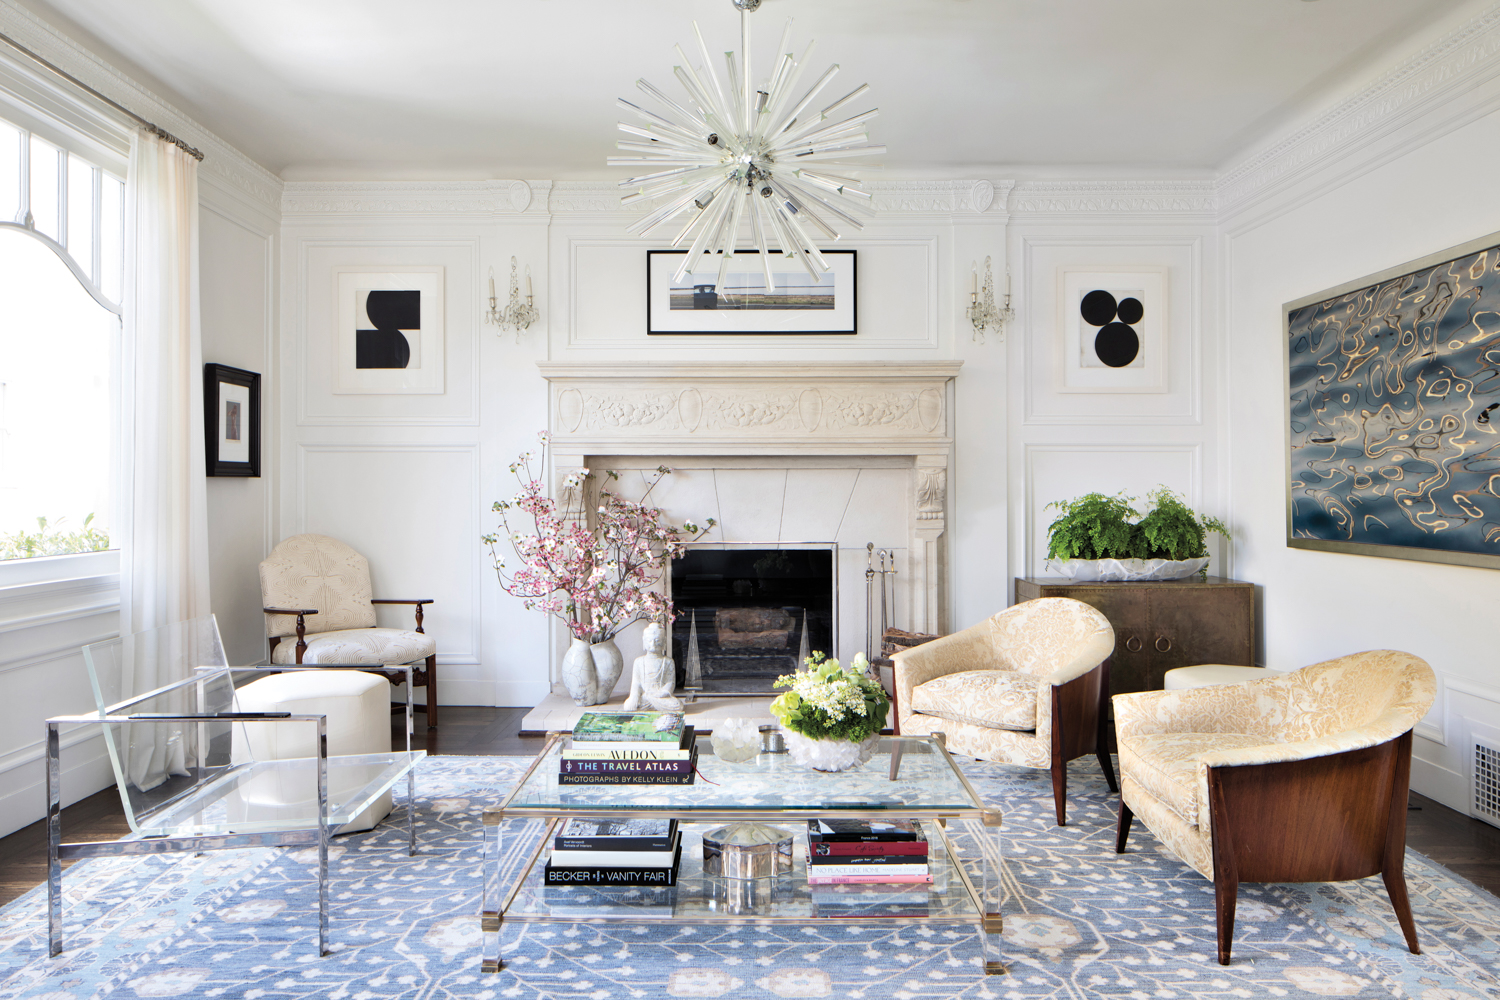 A living room features an...